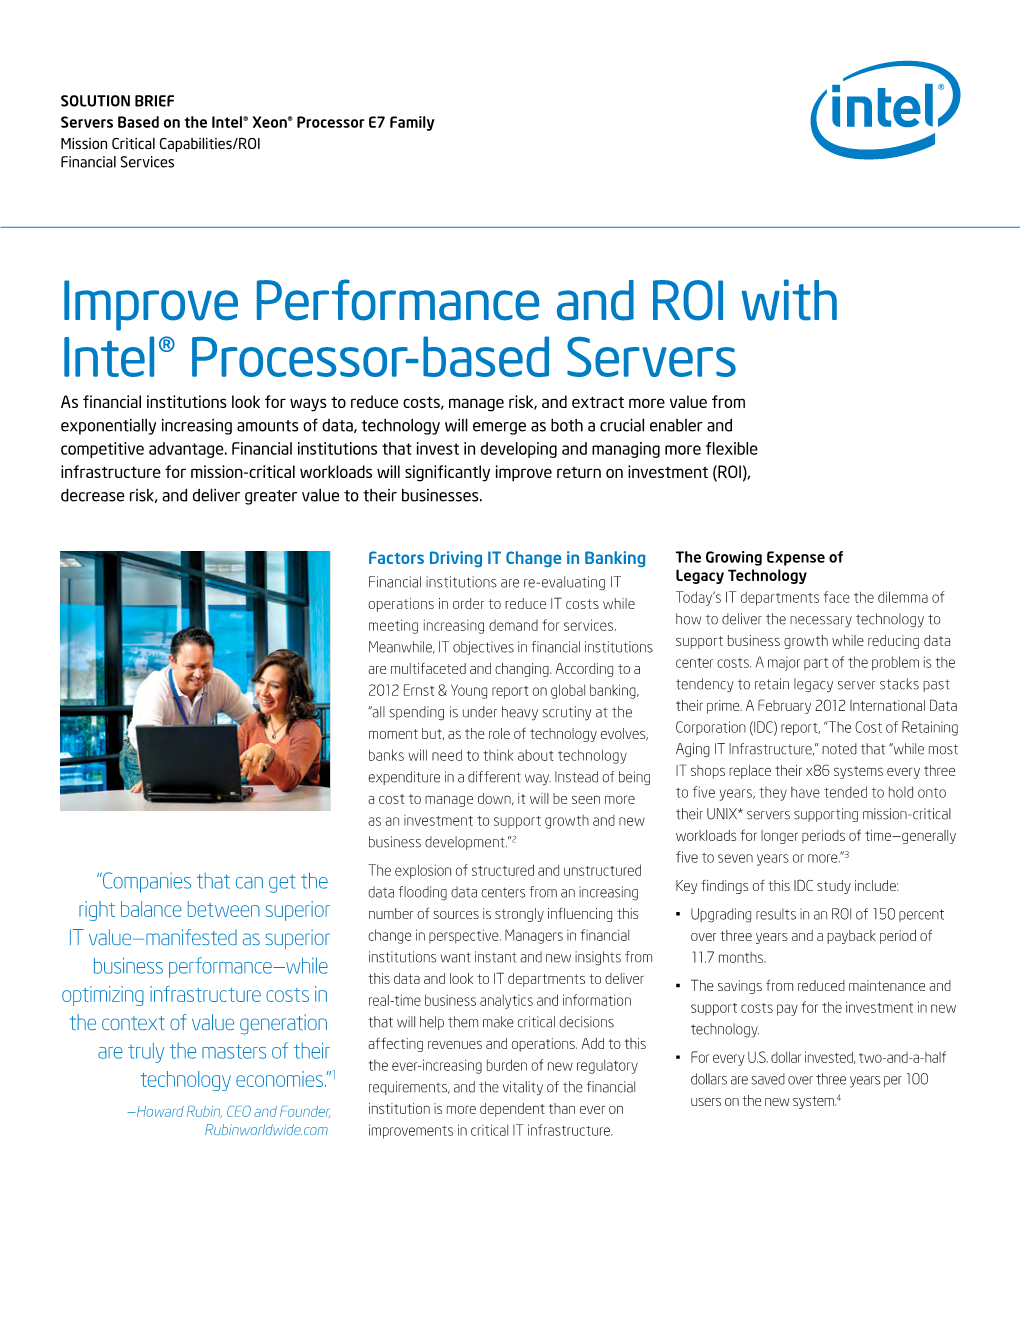 Improve Performance and ROI with Intel® Processor-Based Servers